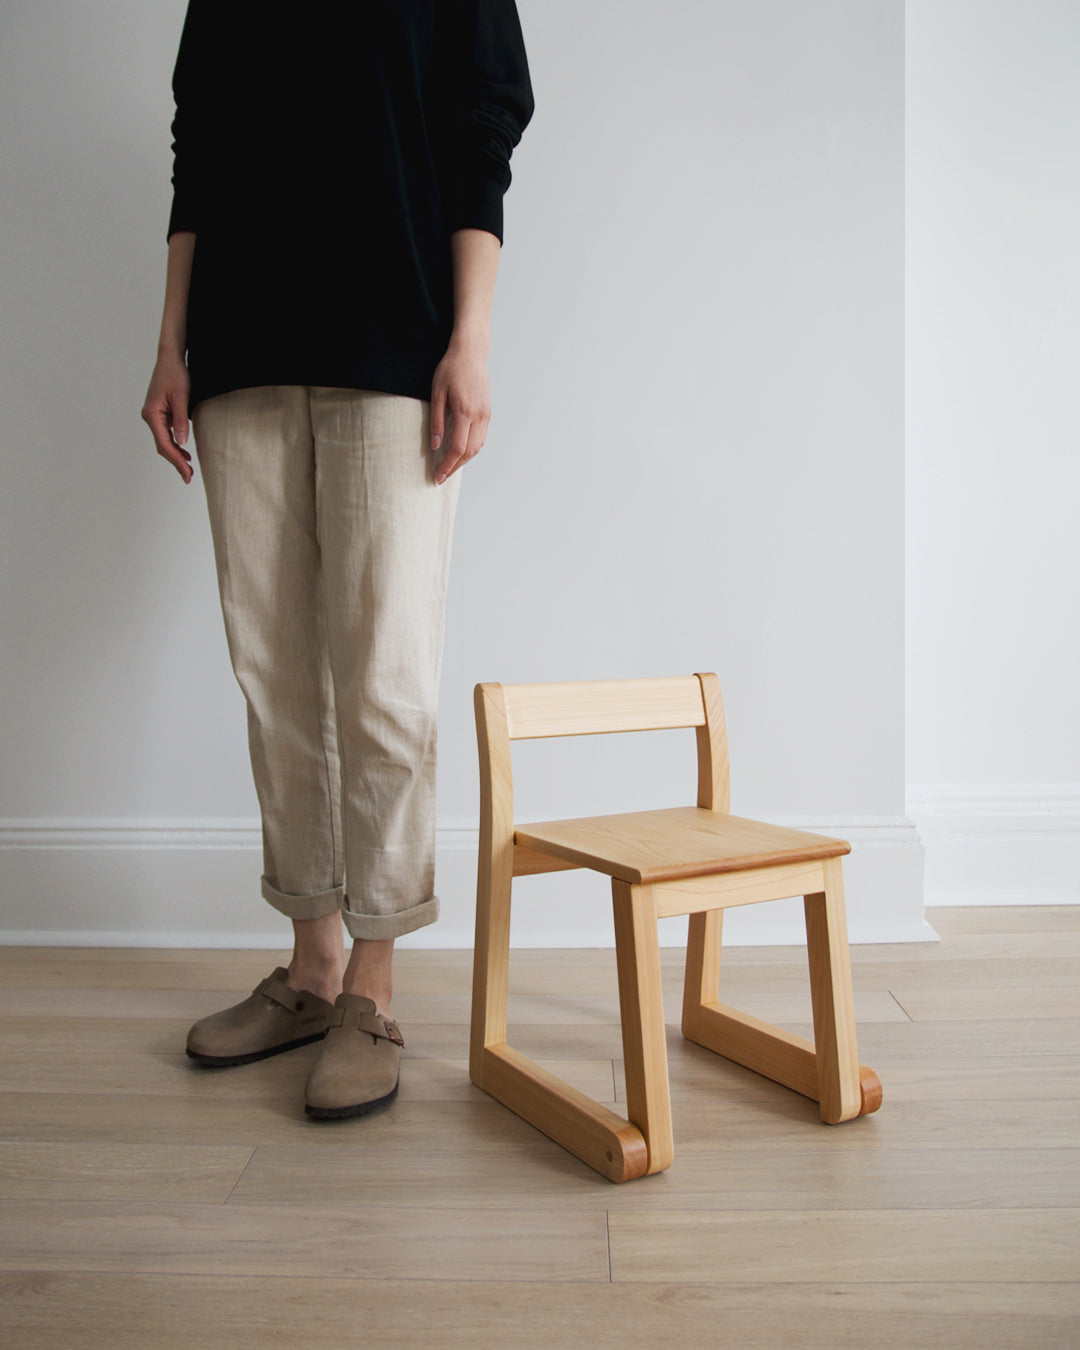 A woman in black t-shirt and beige pant standing next to the 5 year old school chair by makoto koizumi.